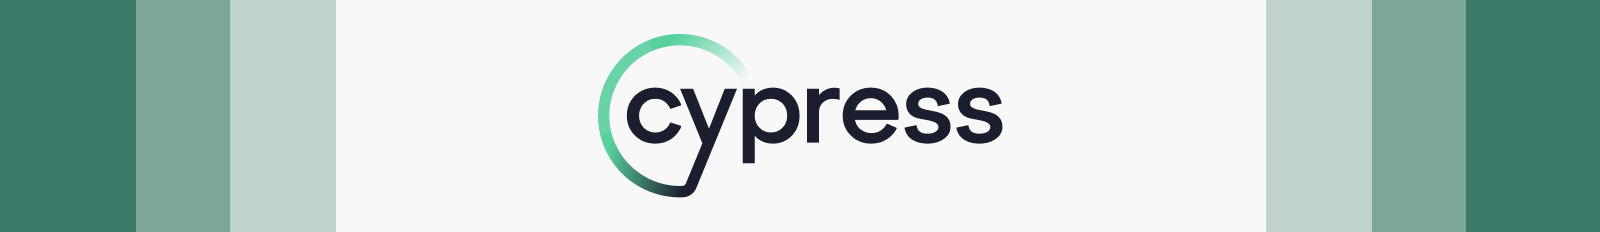 Cypress one of the best Selenium alternatives to do web testing